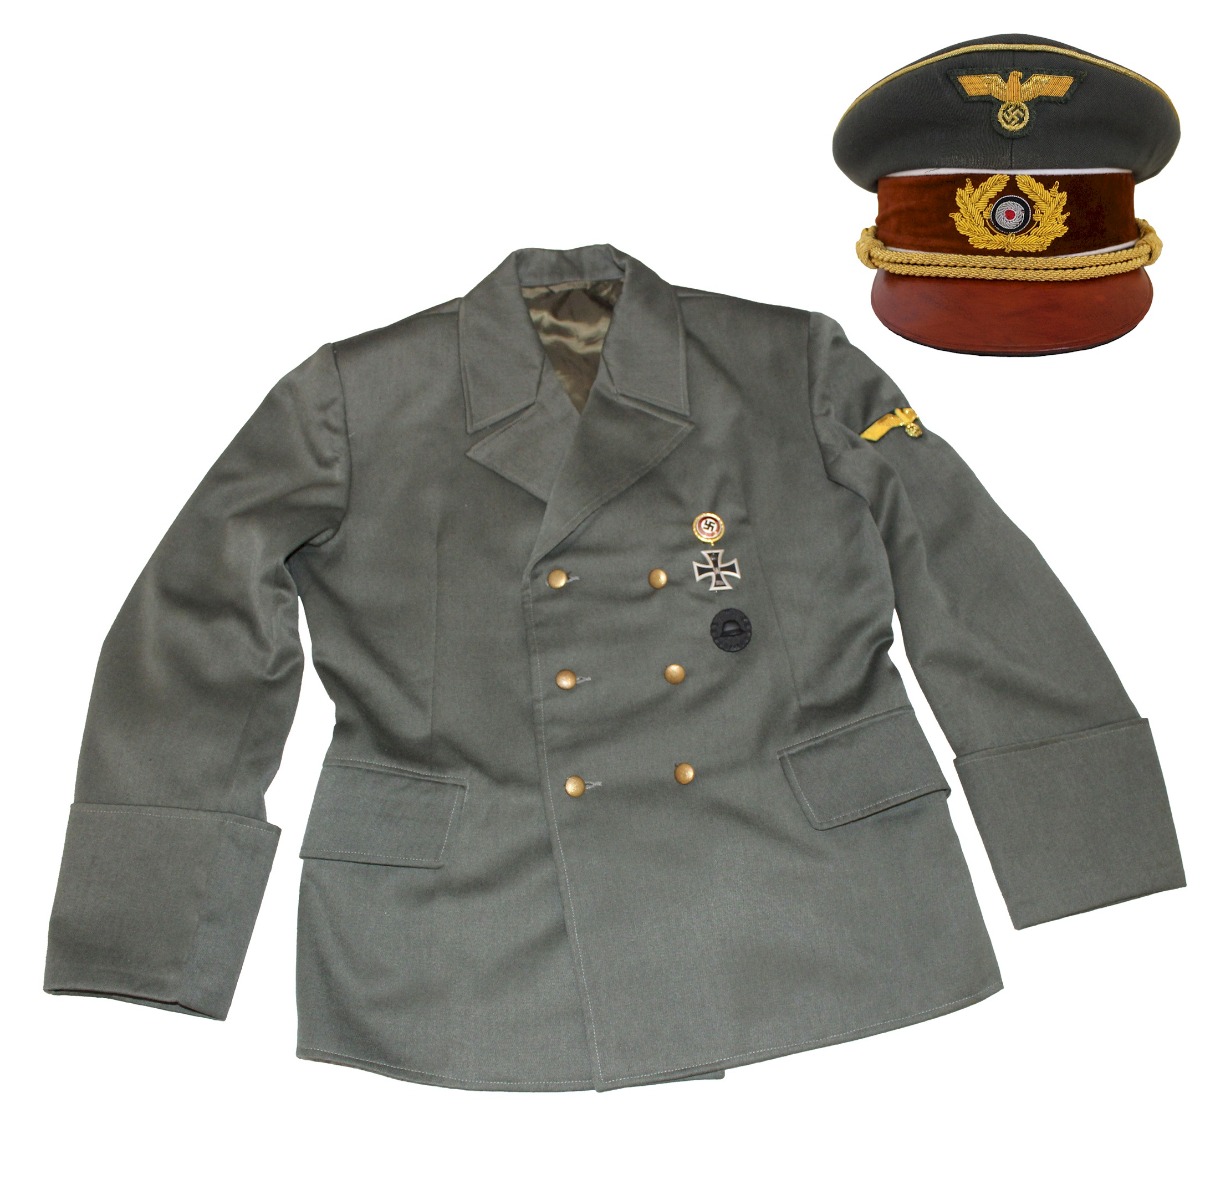 ADOLF HITLER GREEN DOUBLE BREASTED GABARDINE TUNIC AND VISOR CAP WITH INSIGNIA